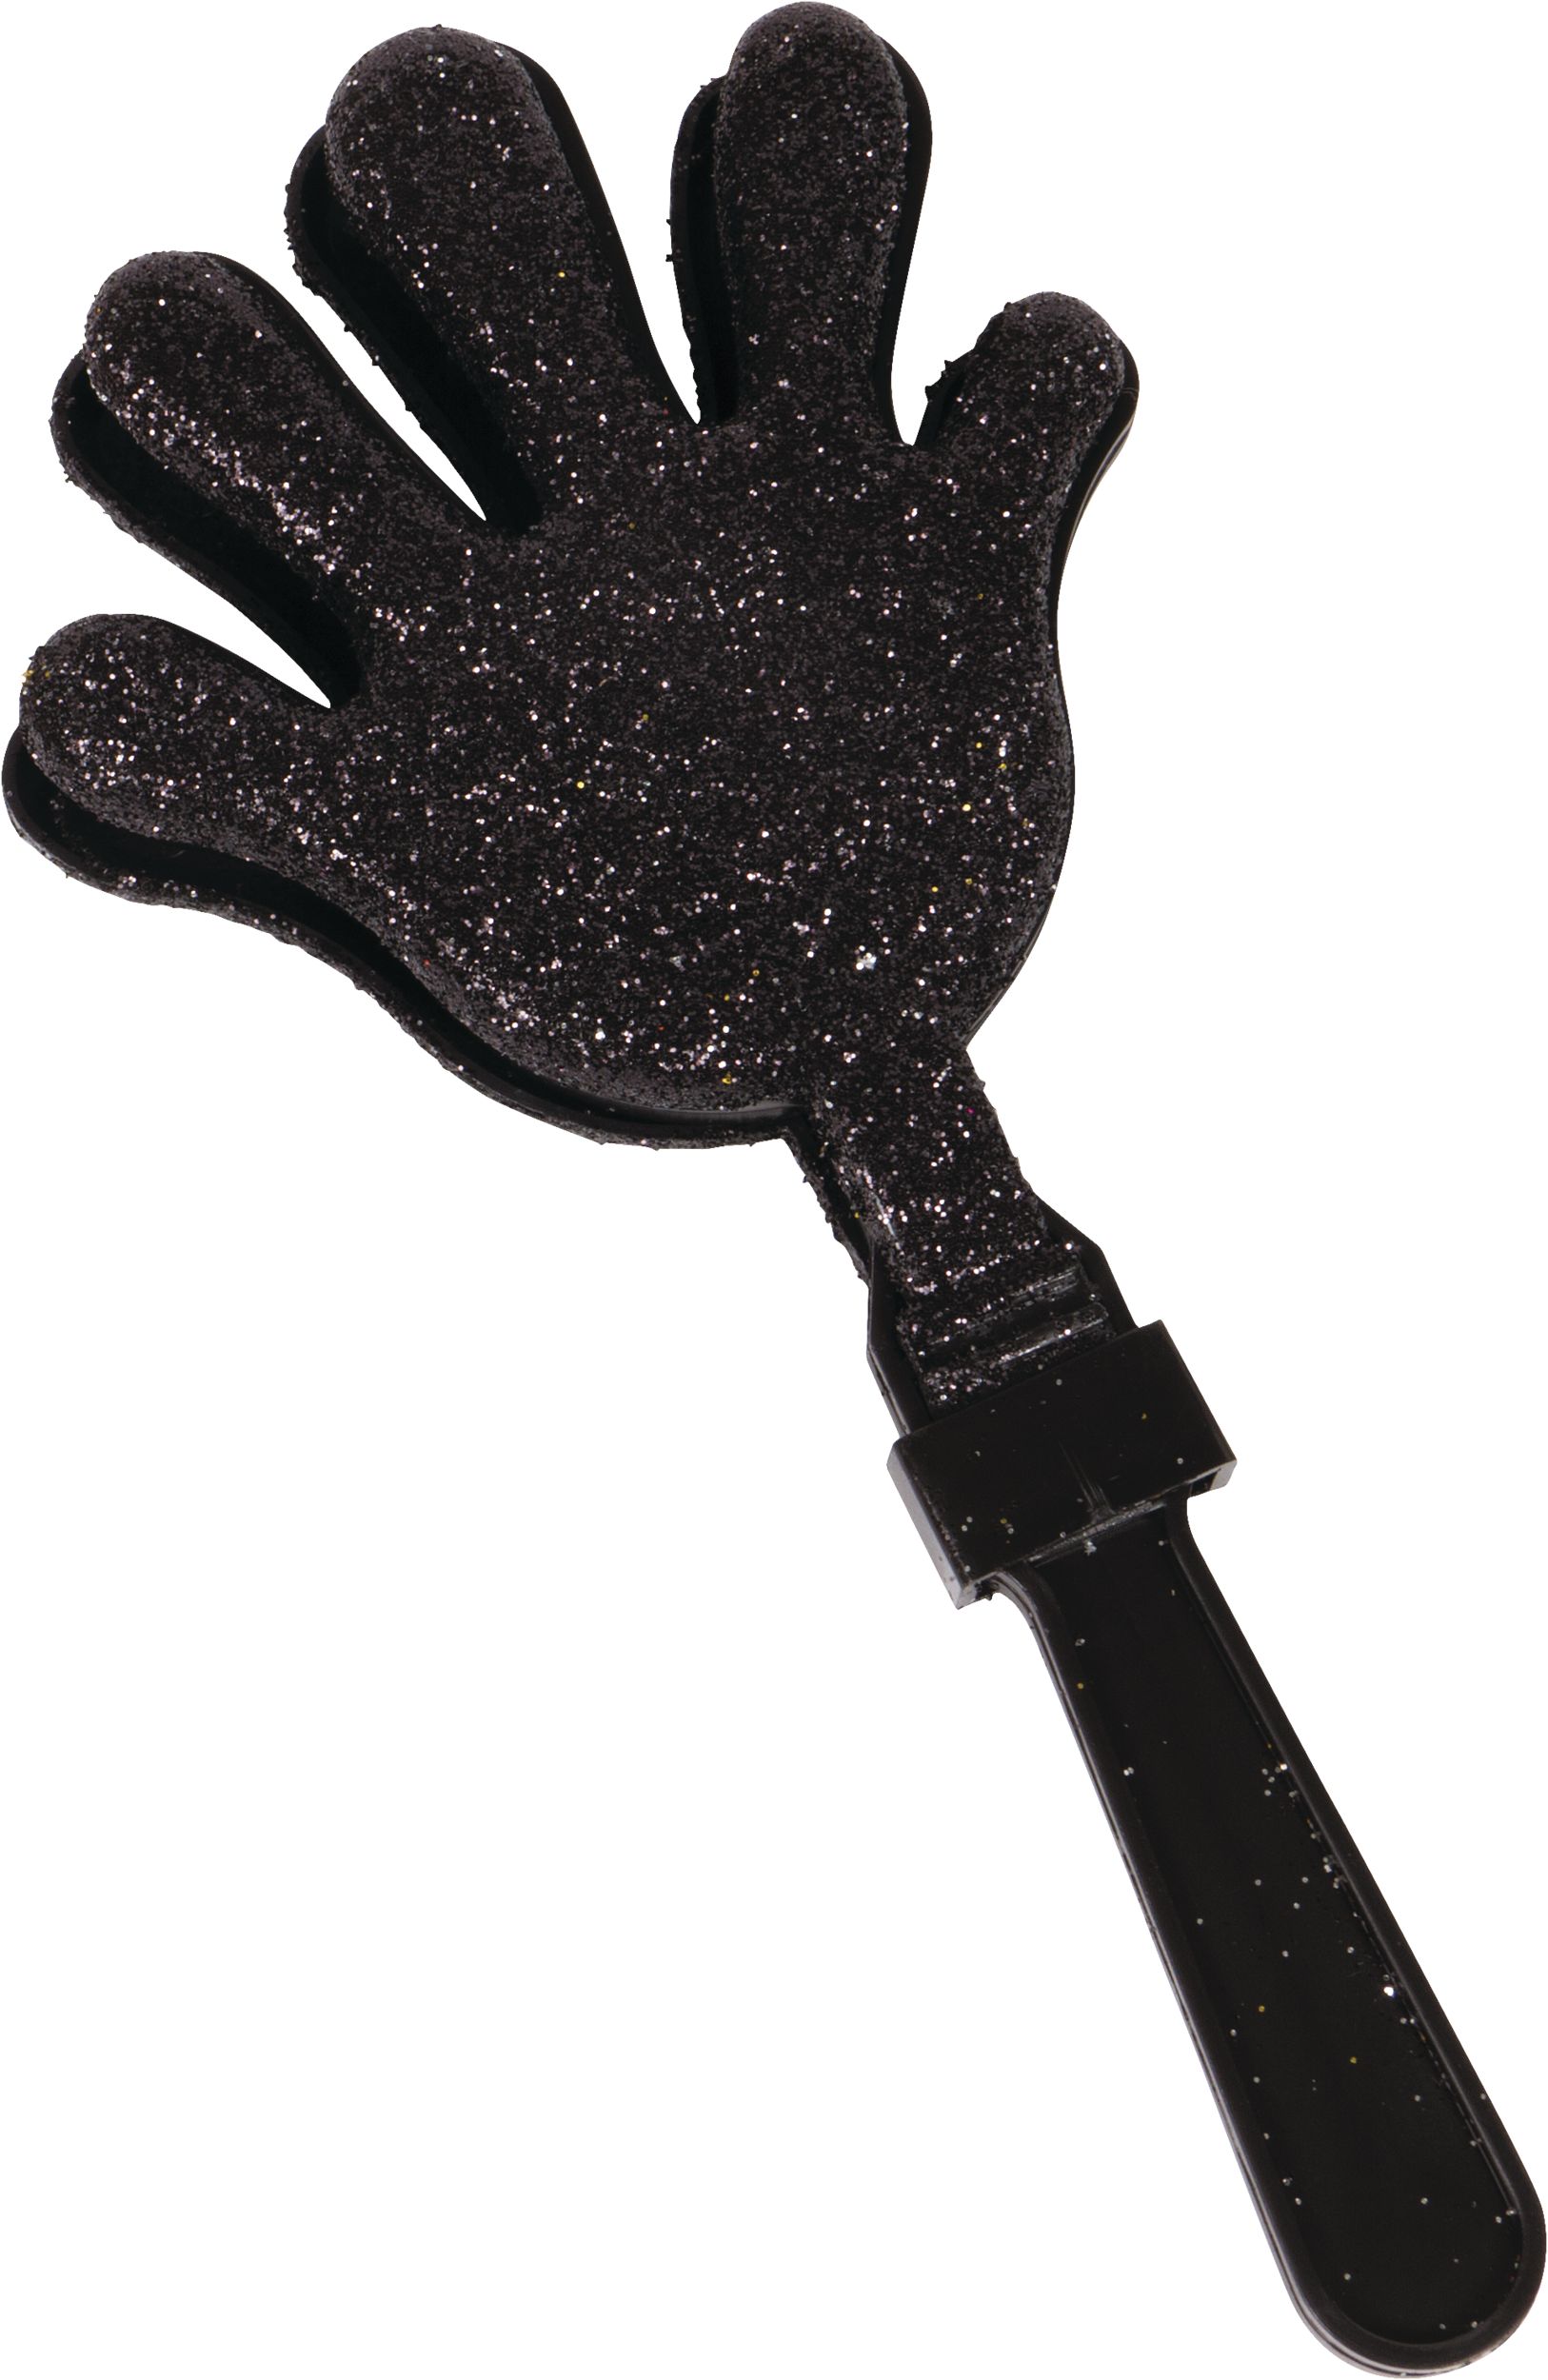 Glitter Hand Clappers - Black Gold & Silver